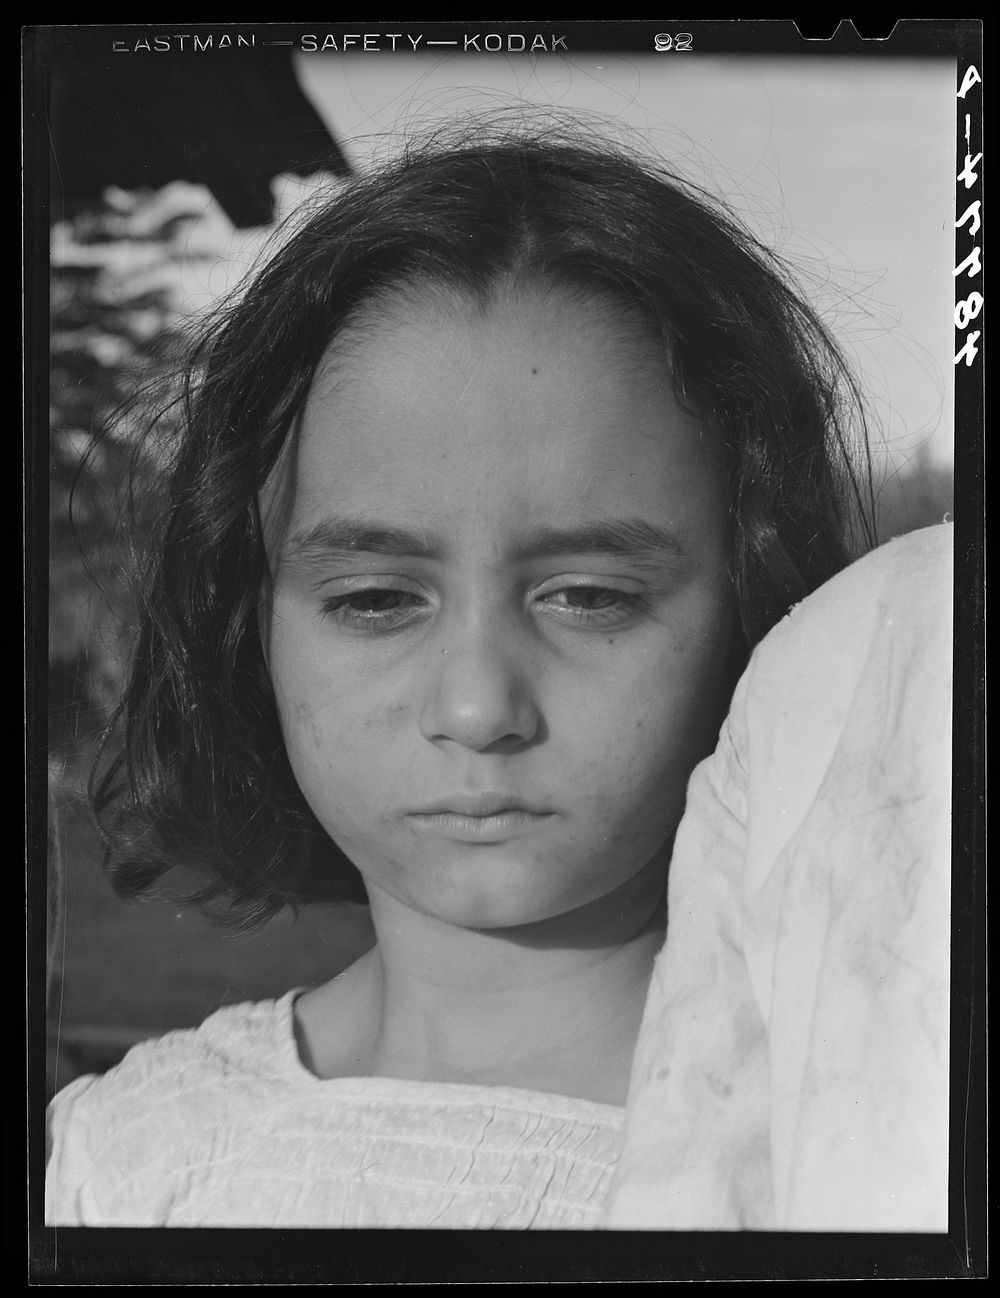 Caguas, Puerto Rico (vicinity). Daughter of a farm laborer. Sourced from the Library of Congress.